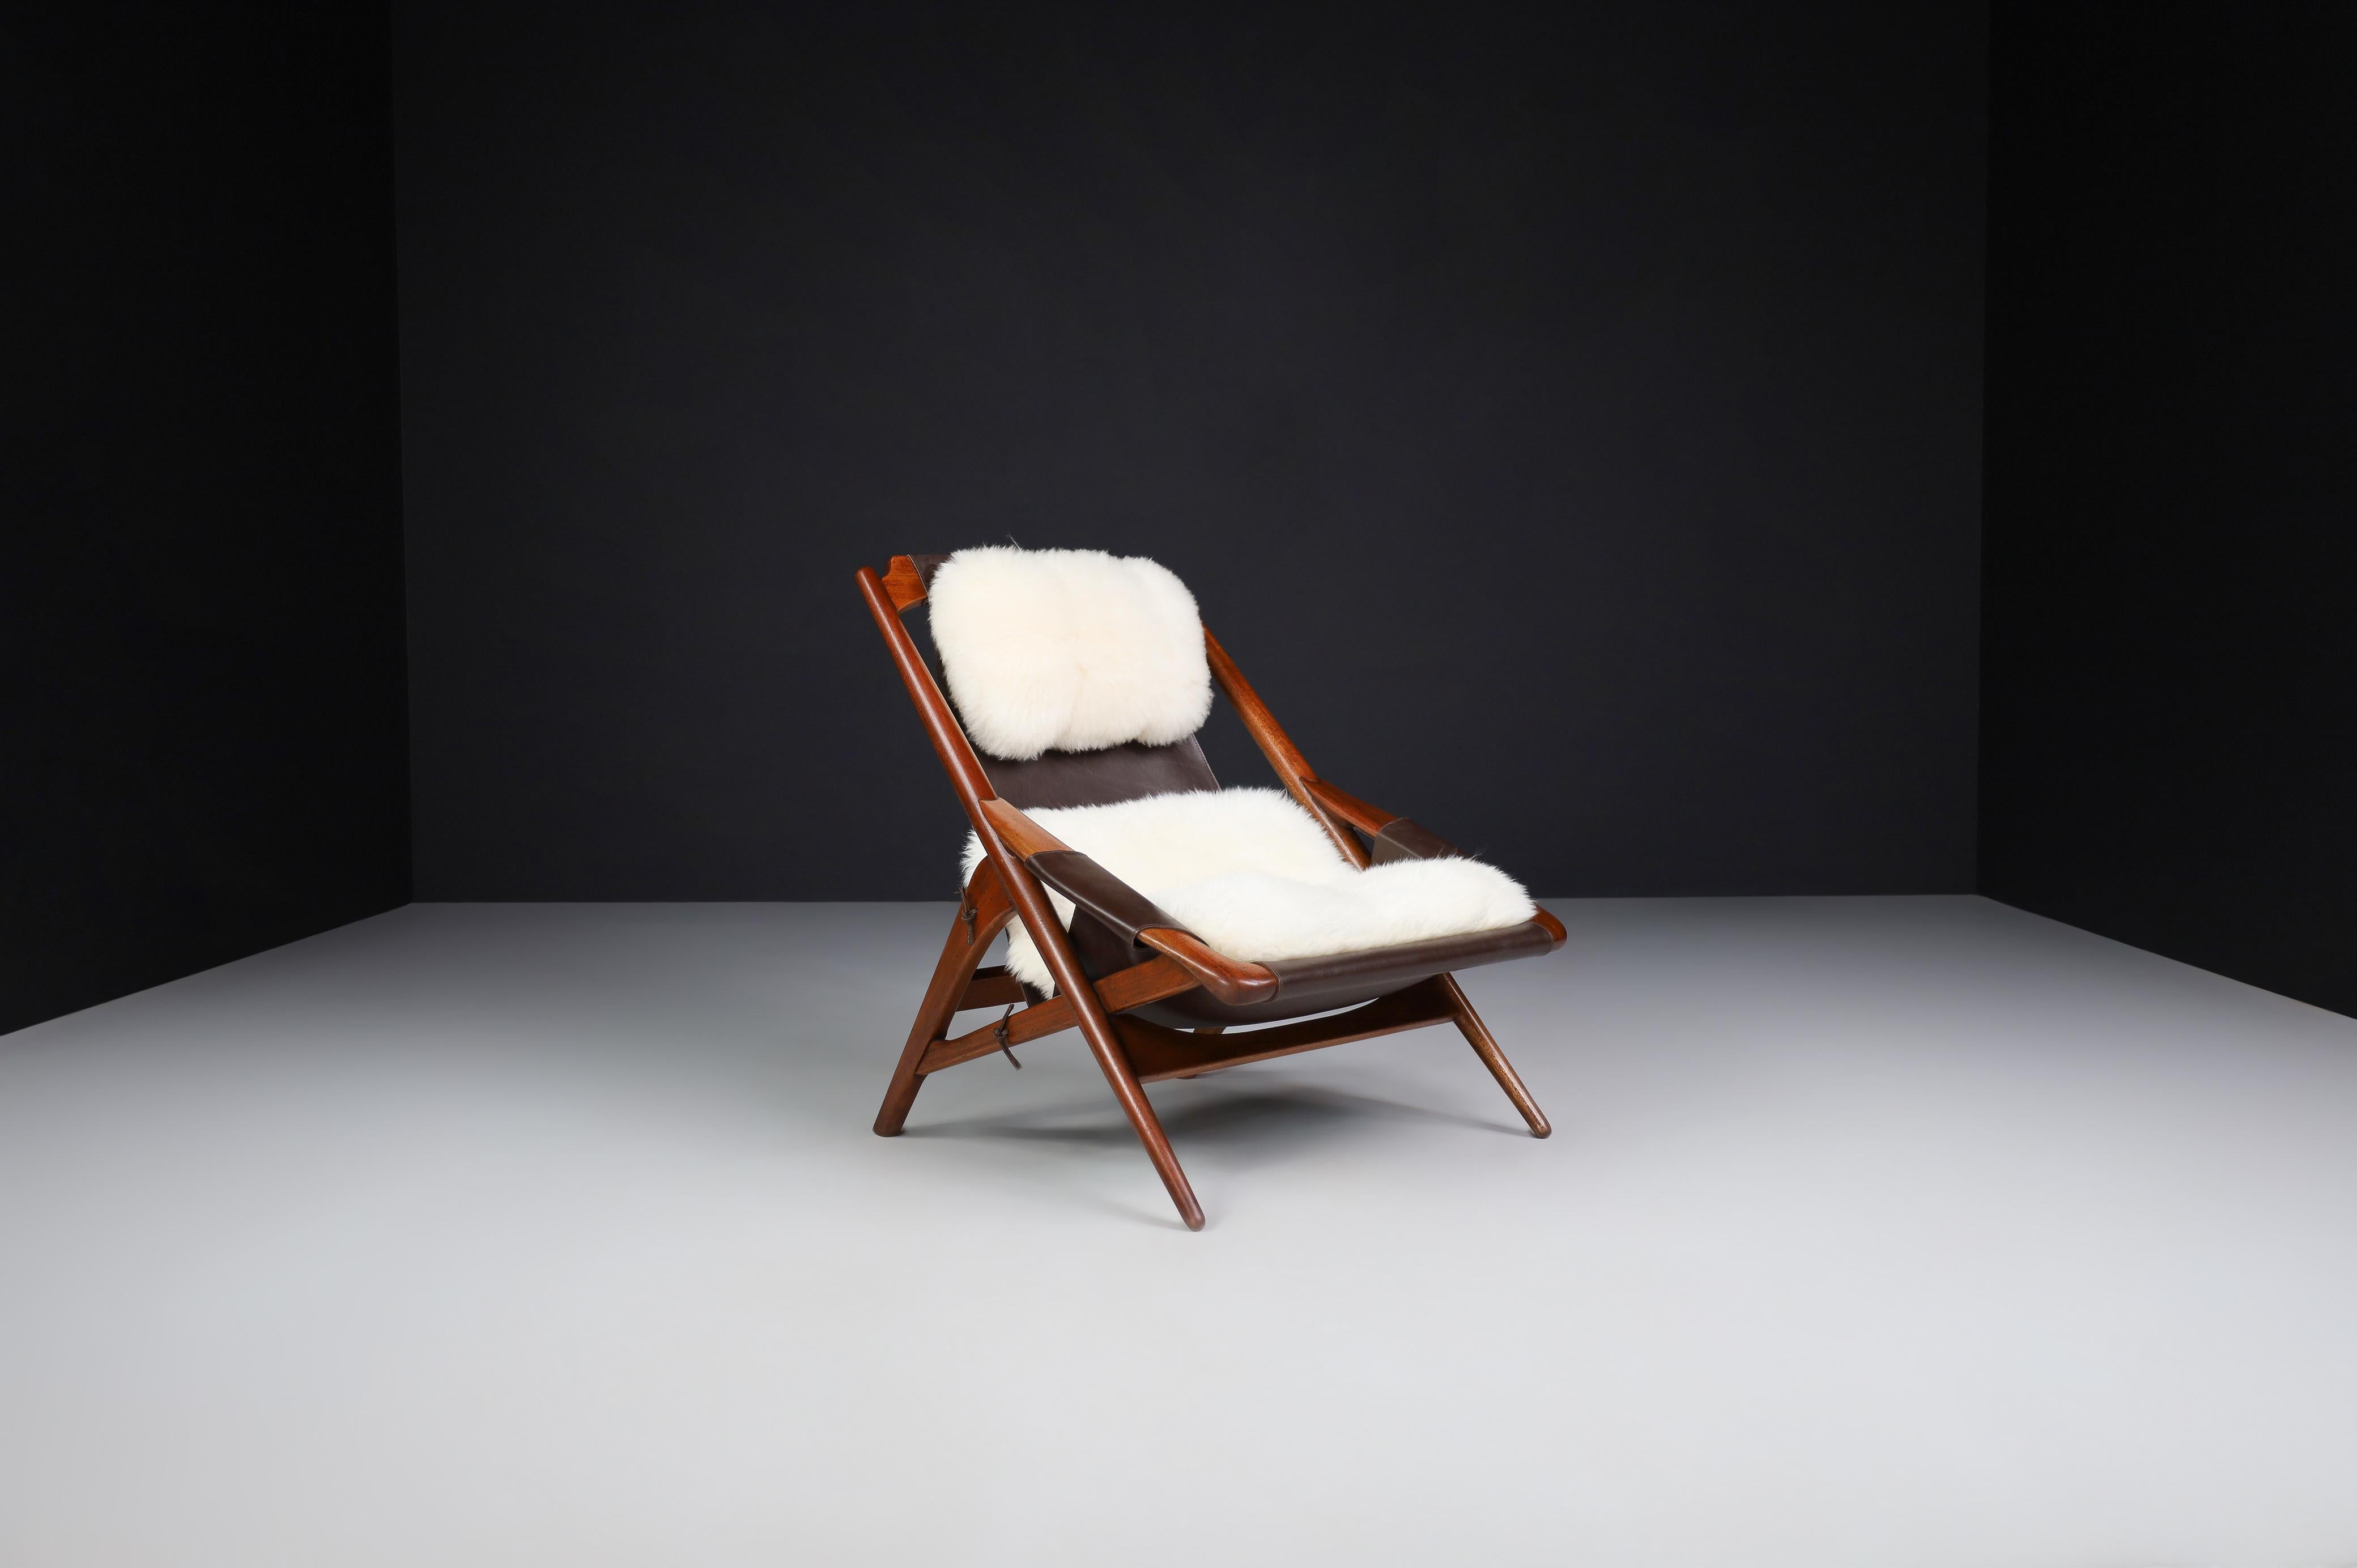 W.D. Andersag Lounge Chairs Teak and Leather, Italy, 1959 For Sale 6